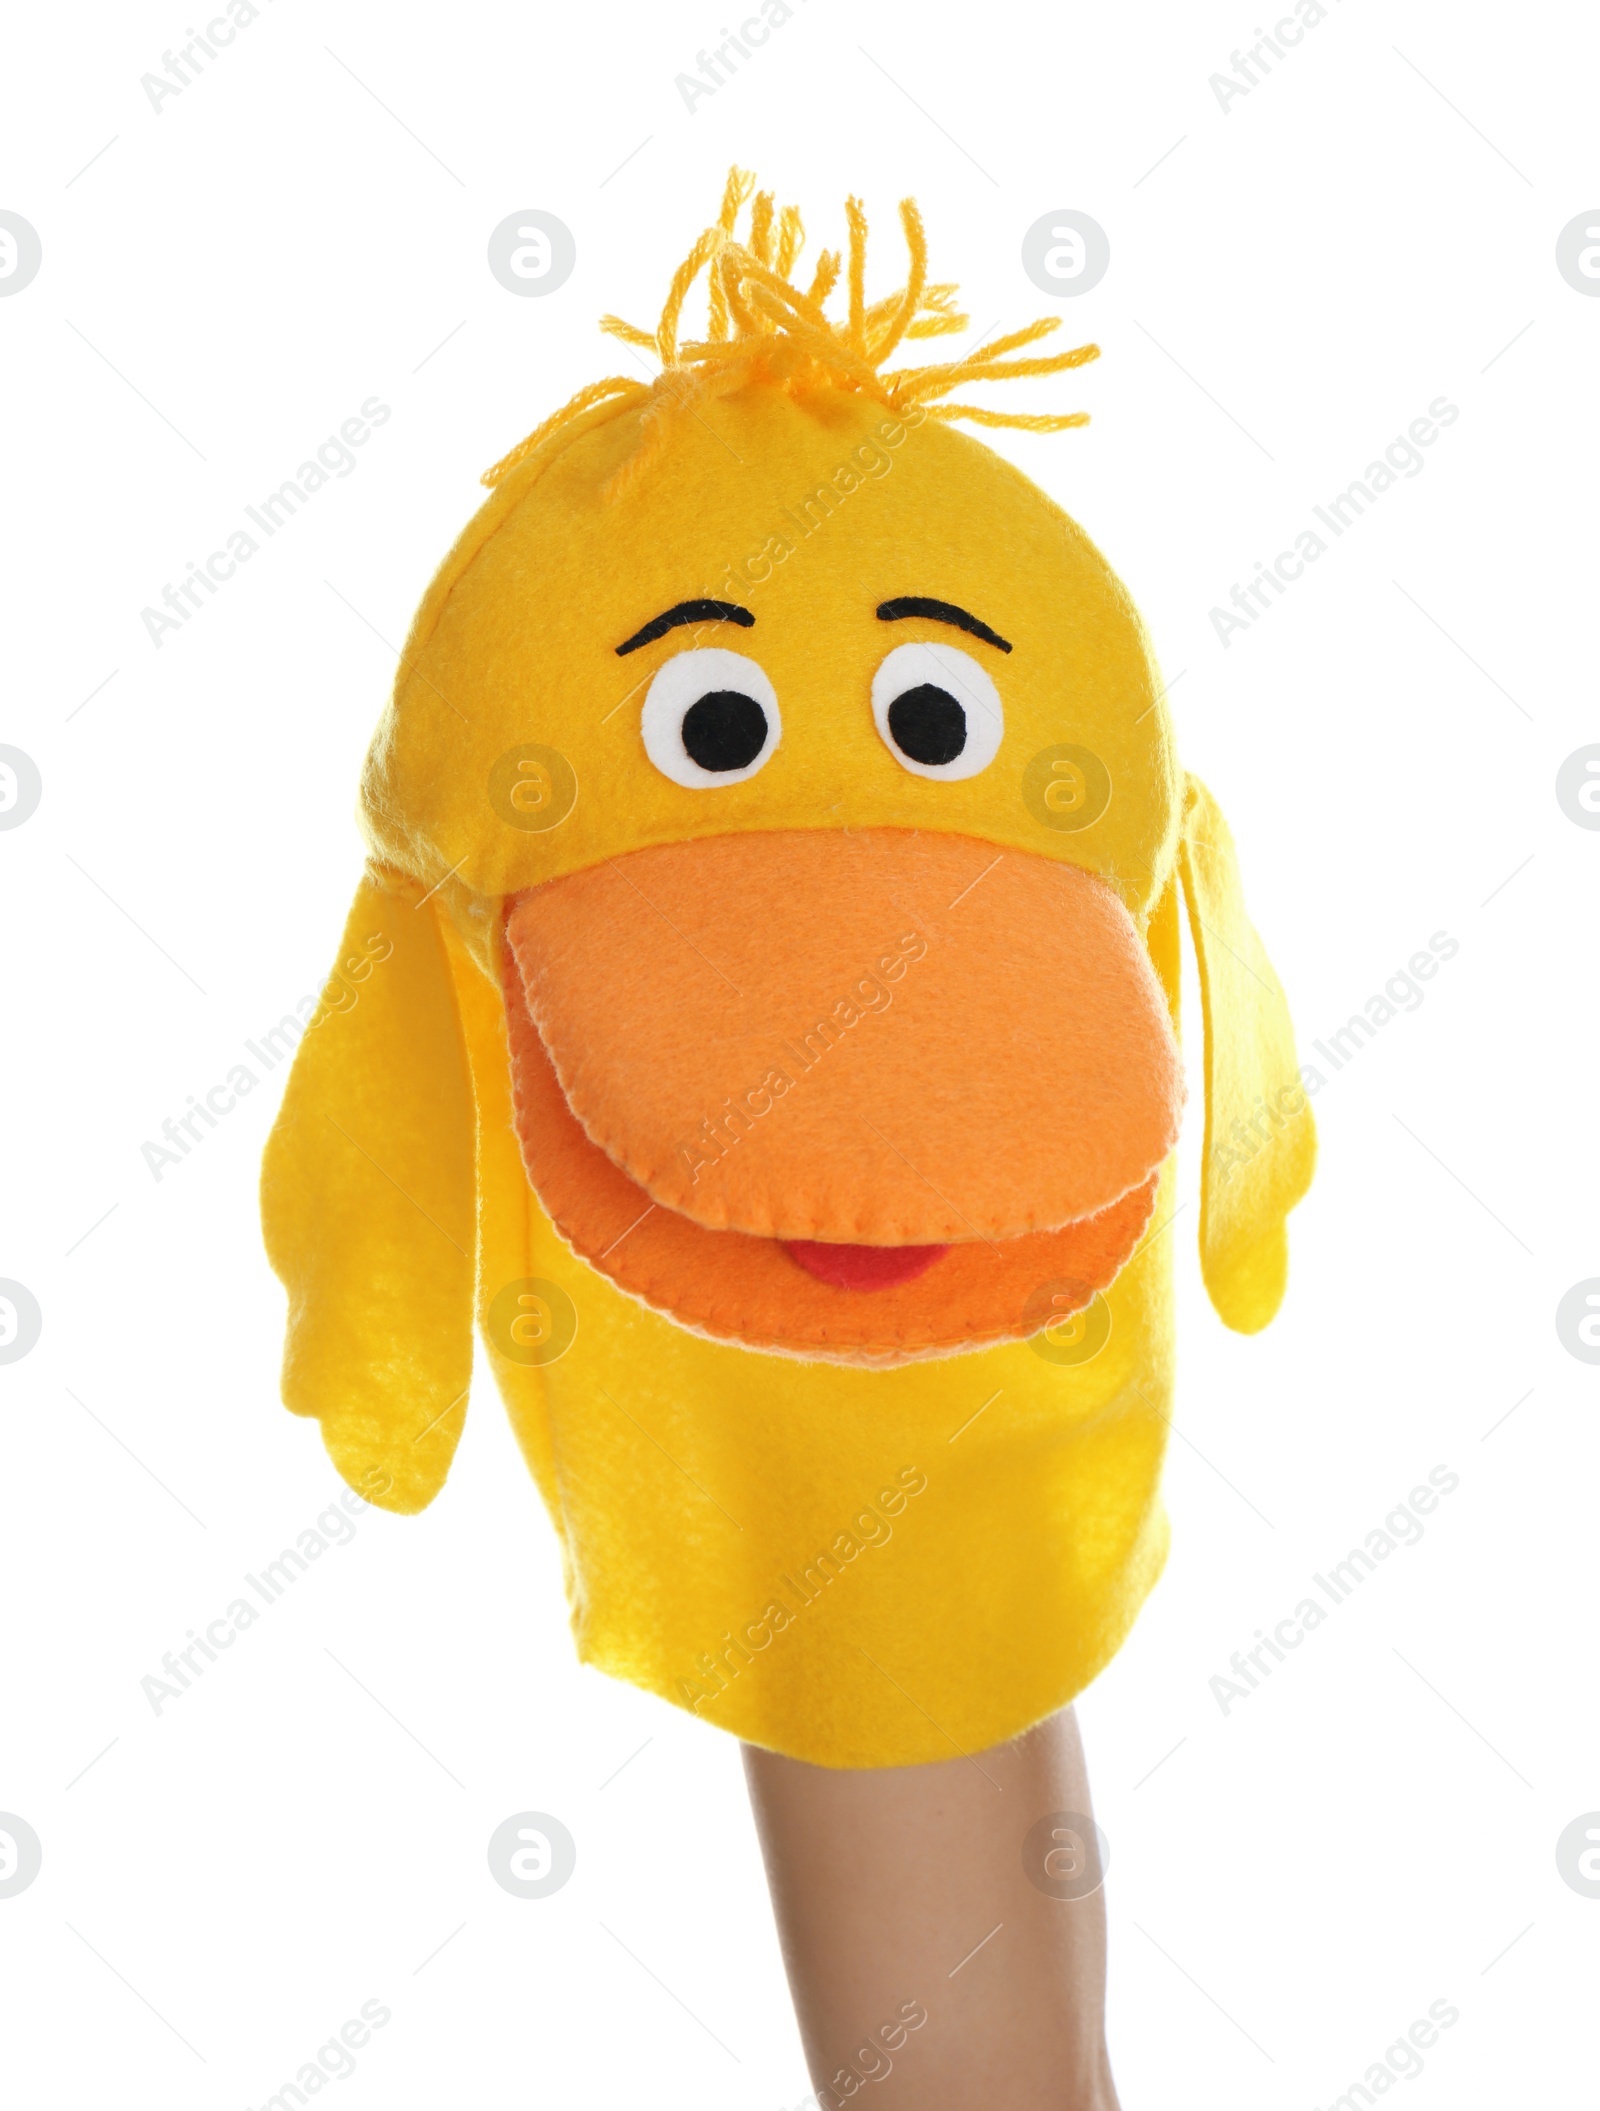 Photo of Duck puppet for show on hand against white background